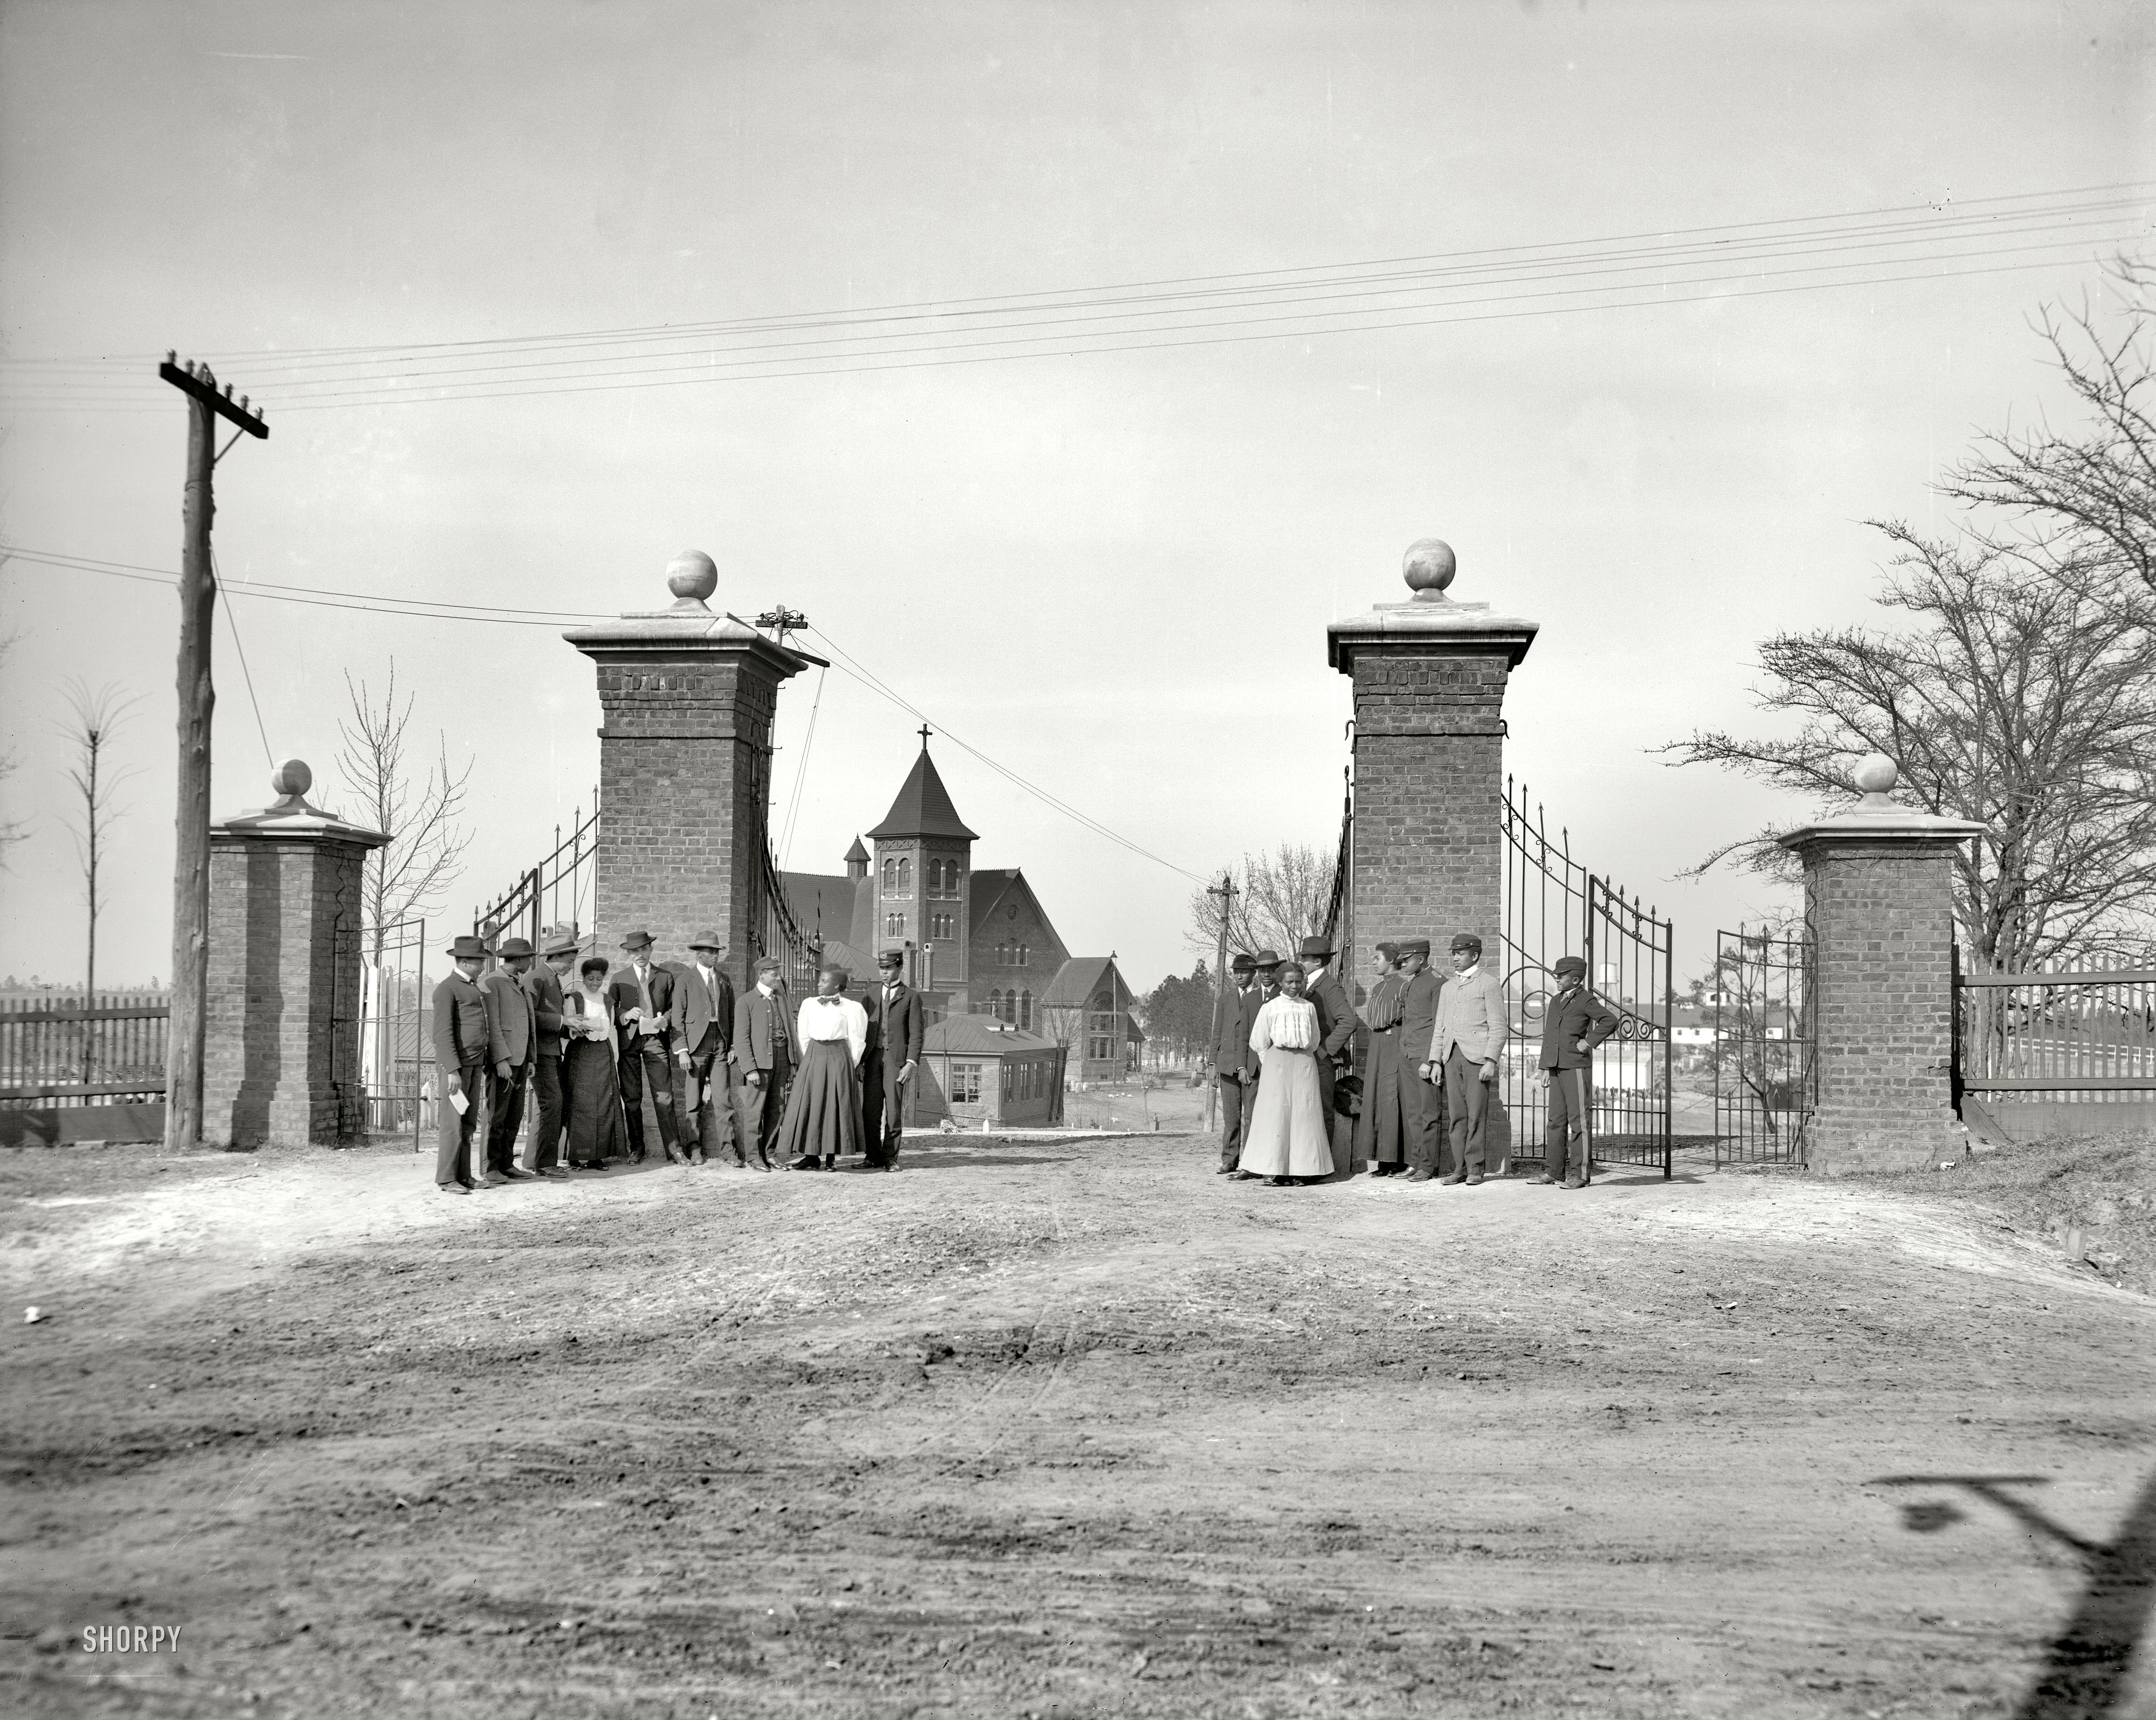 Tuskegee, Alabama, circa 1906. "The Lincoln gates, Tuskegee Institute." 8x10 inch dry plate glass negative, Detroit Publishing Company. View full size.